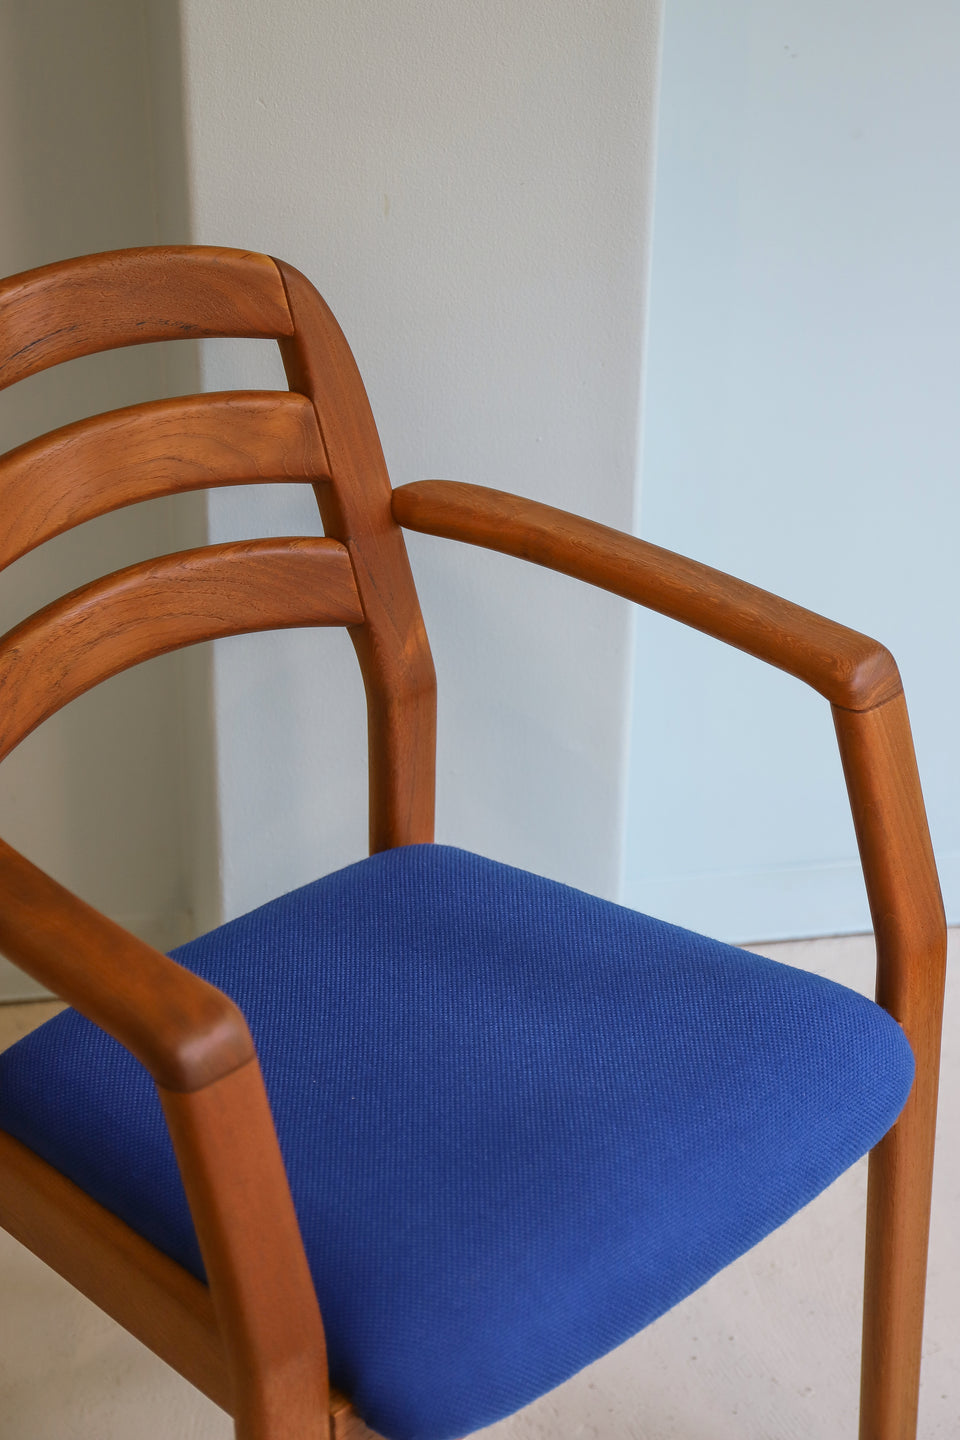 Danish Vintage Dyrlund Arm Chair Teakwood/デンマーク ヴィンテージ デューロン アームチェア チーク材 北欧家具